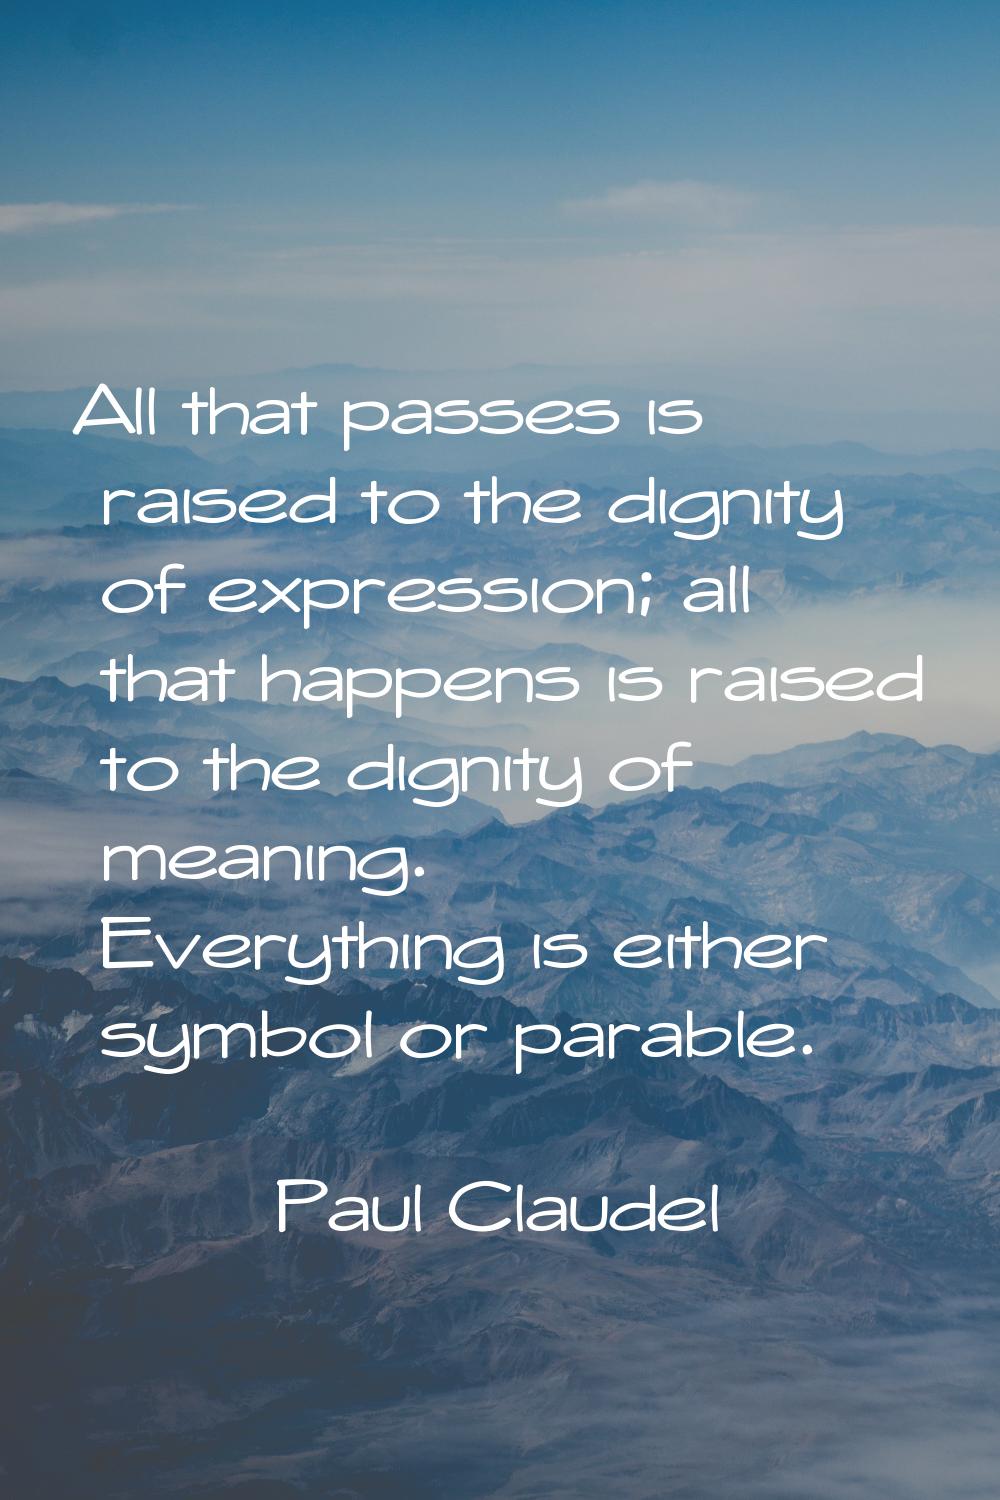 All that passes is raised to the dignity of expression; all that happens is raised to the dignity o